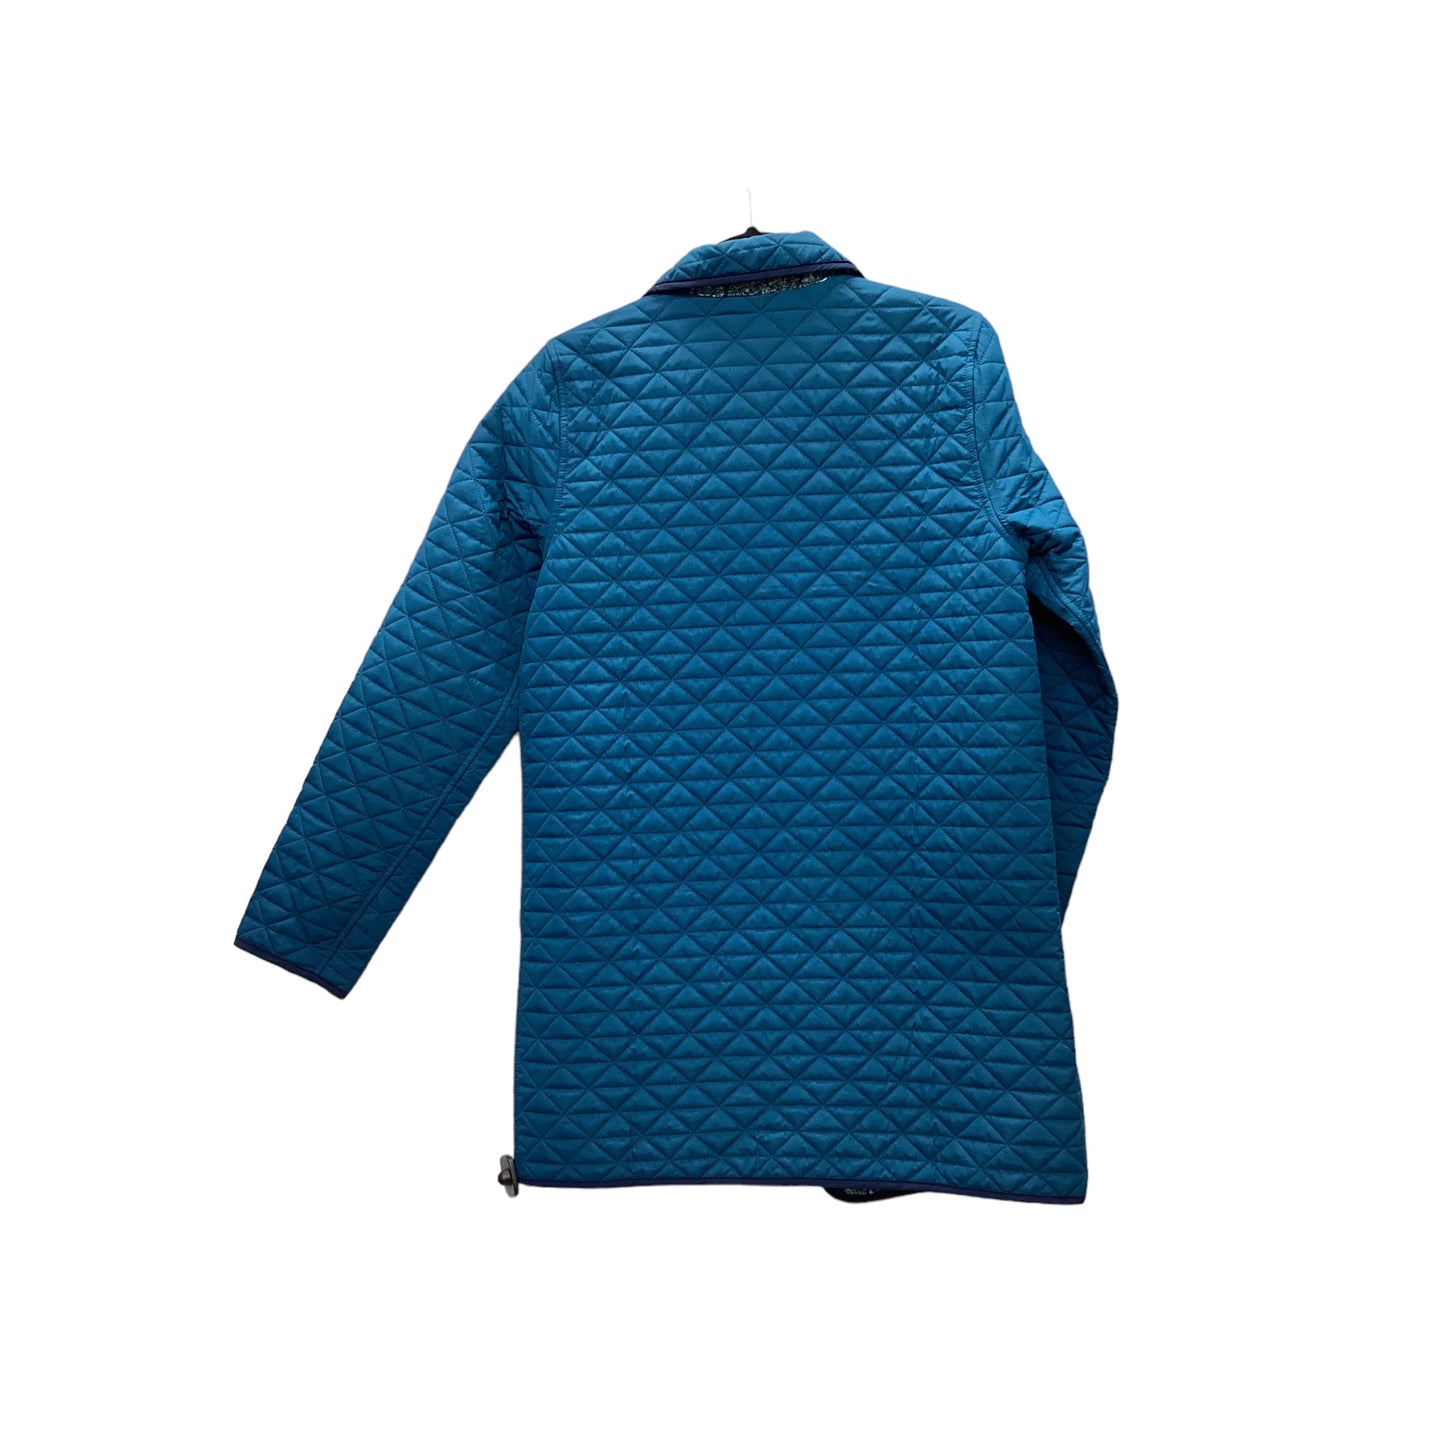 Jacket Puffer & Quilted By Lands End  Size: S